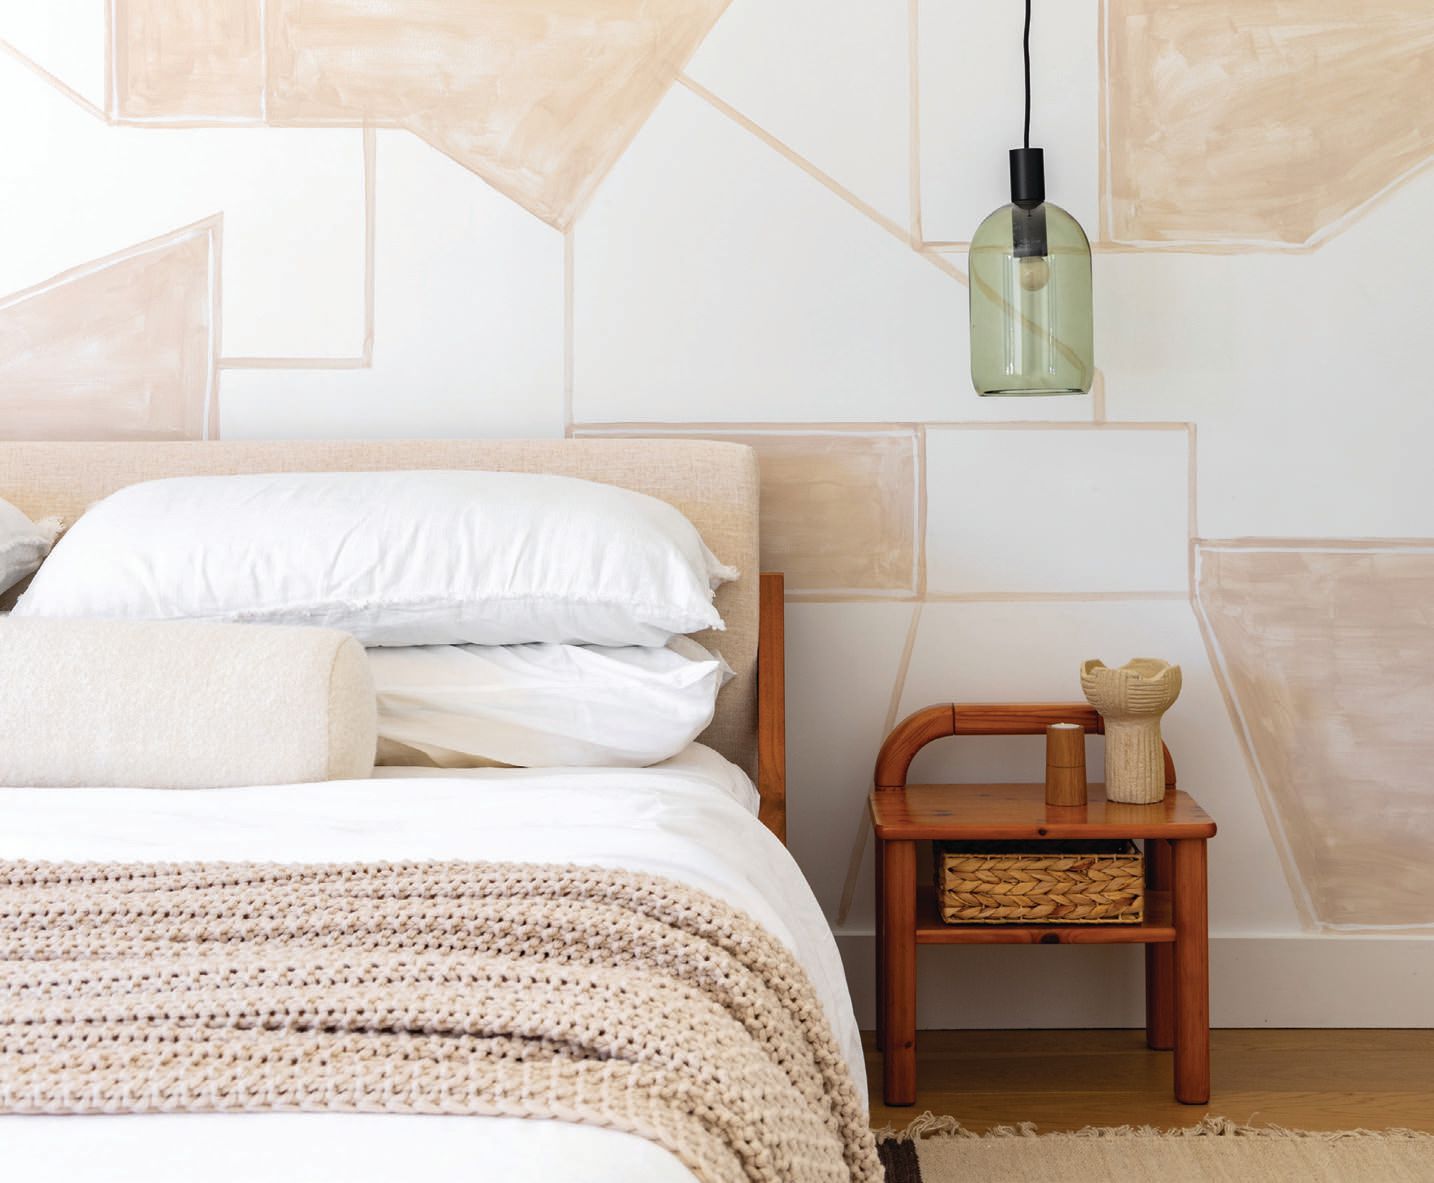 A painterly mural by Passion 4 Murals lights up the primary bedroom, which features a CB2 bed, a lumbar pillow from The Citizenry, vintage nightstands found at 1stDibs and Blu Dot pendant lights Photographed by Kevin Brost